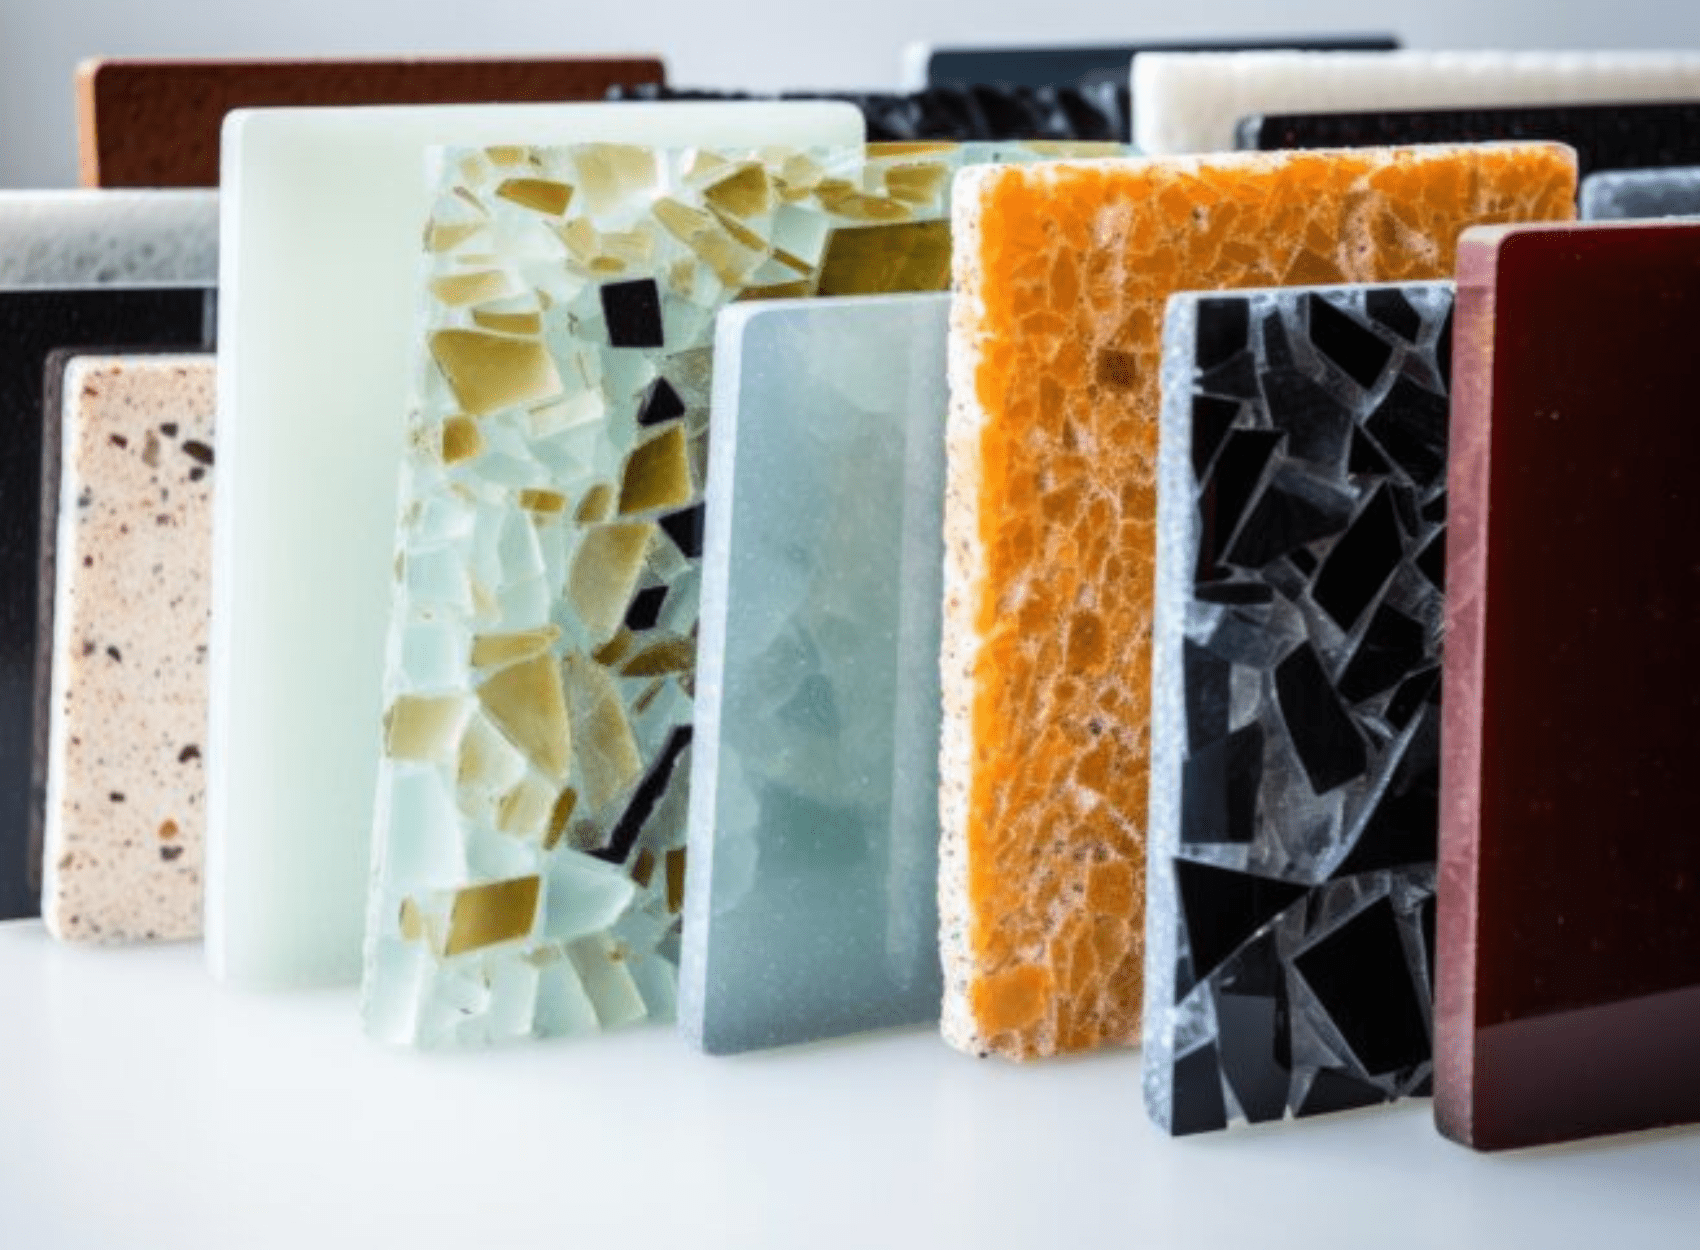 Recycled glass as a sustainable building material